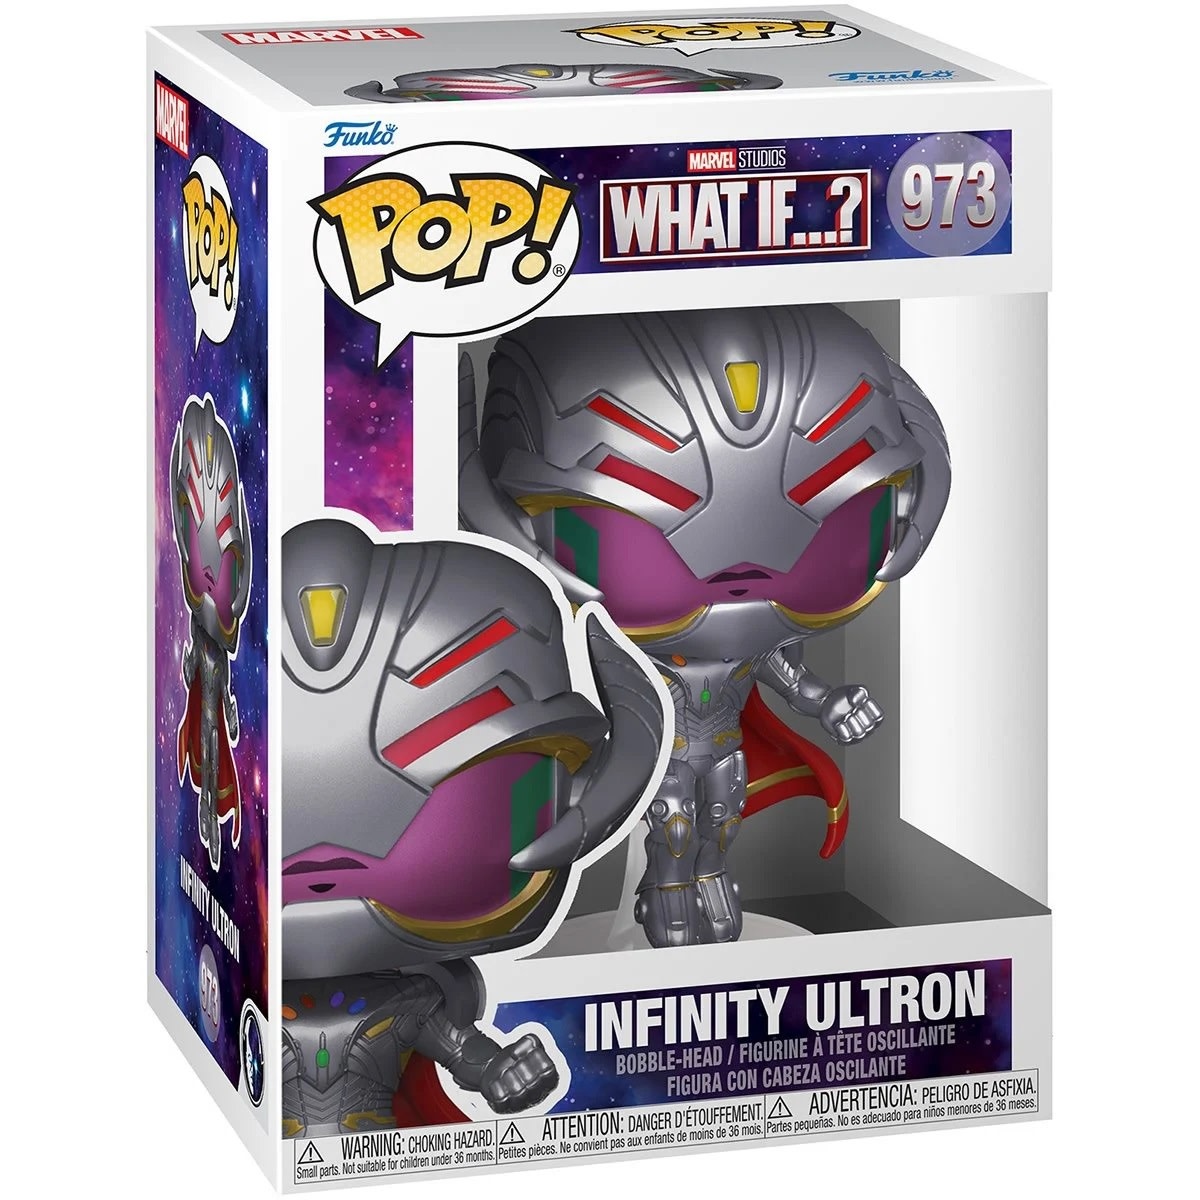 Funko POP! Infinity Ultron # 973 - Marvel What If?